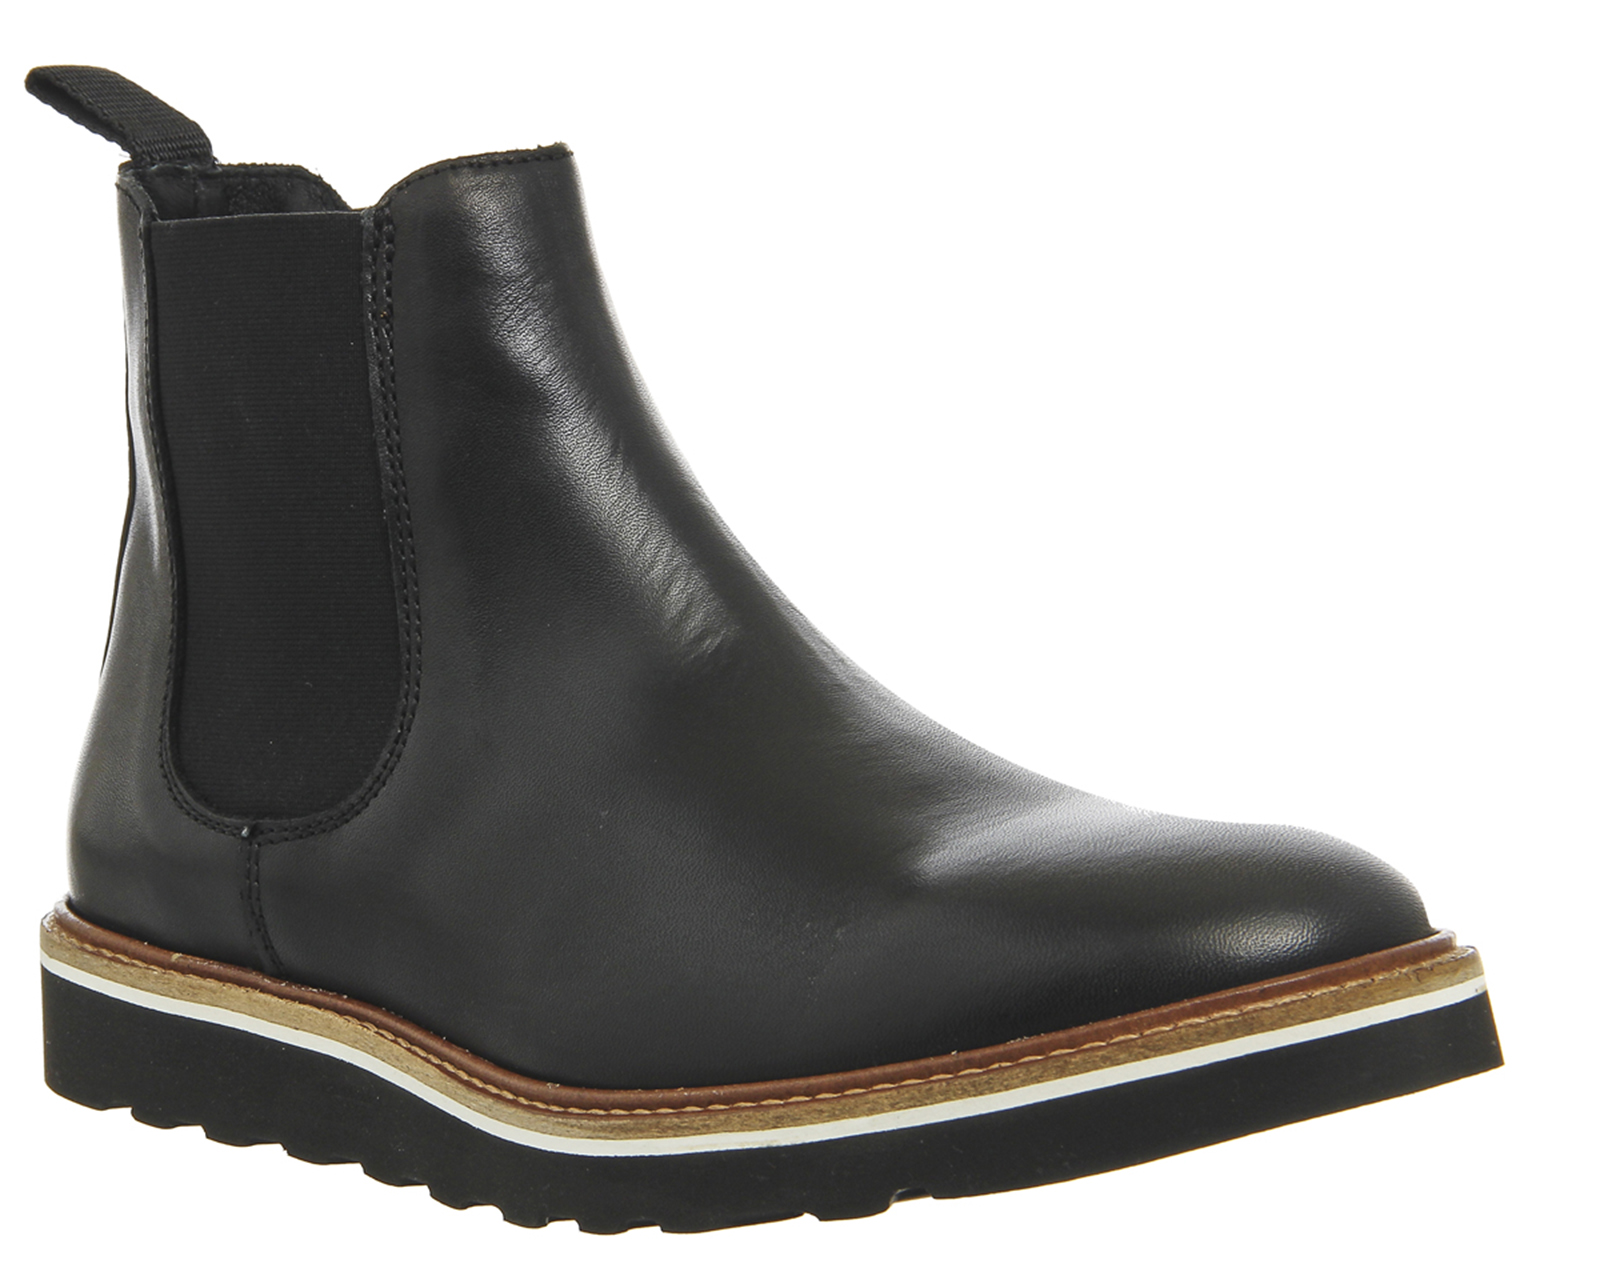 mens black wedge sole boots